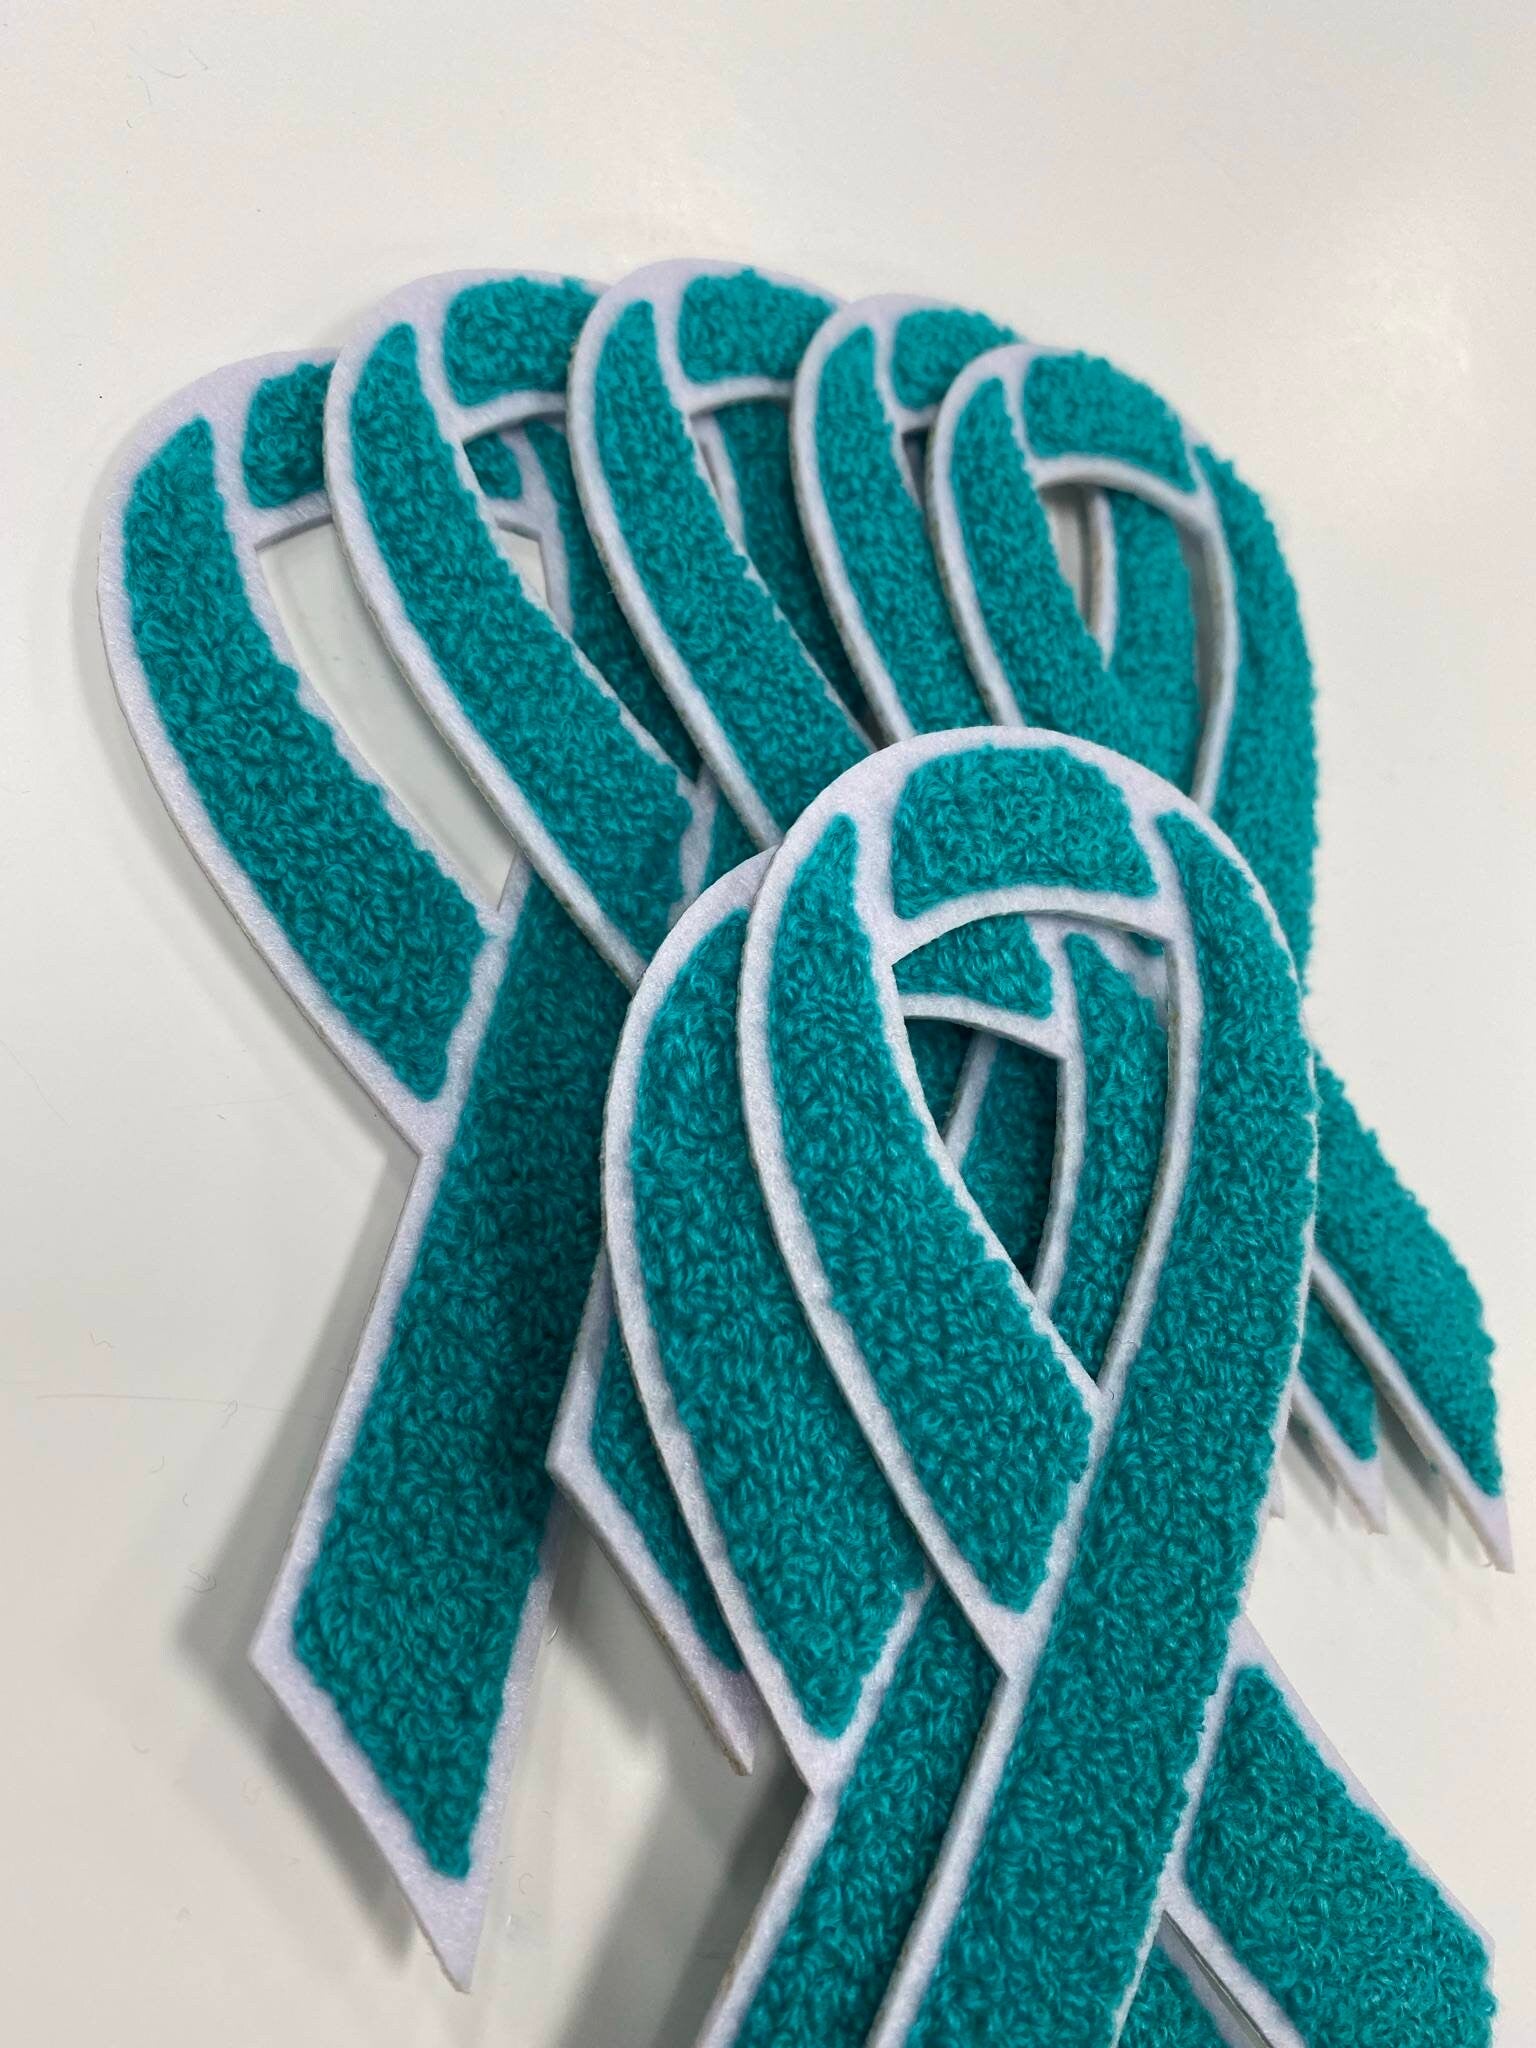 New 1-pc, Cervical & Ovarian Cancer "Teal Chenille" Awareness Ribbon Patch, 5.5" Iron or Sew-on, Cancer  Patch/Applique, Support Ribbon